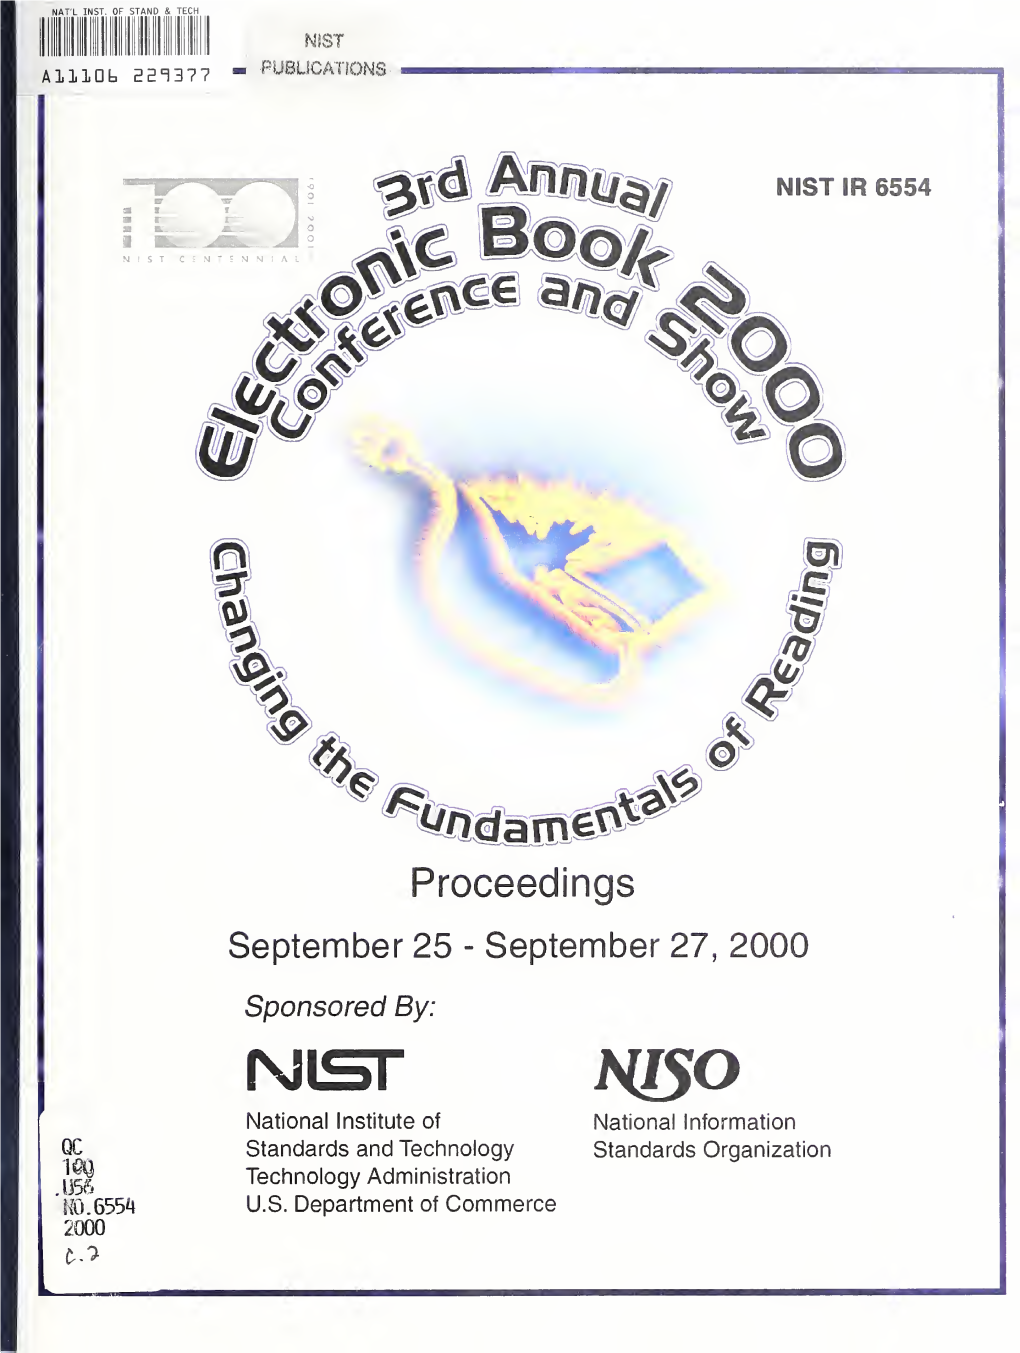 3Rd Annual Electronic Book 2000 Conference and Show “Changing the Fundamentals of Reading” Proceedings